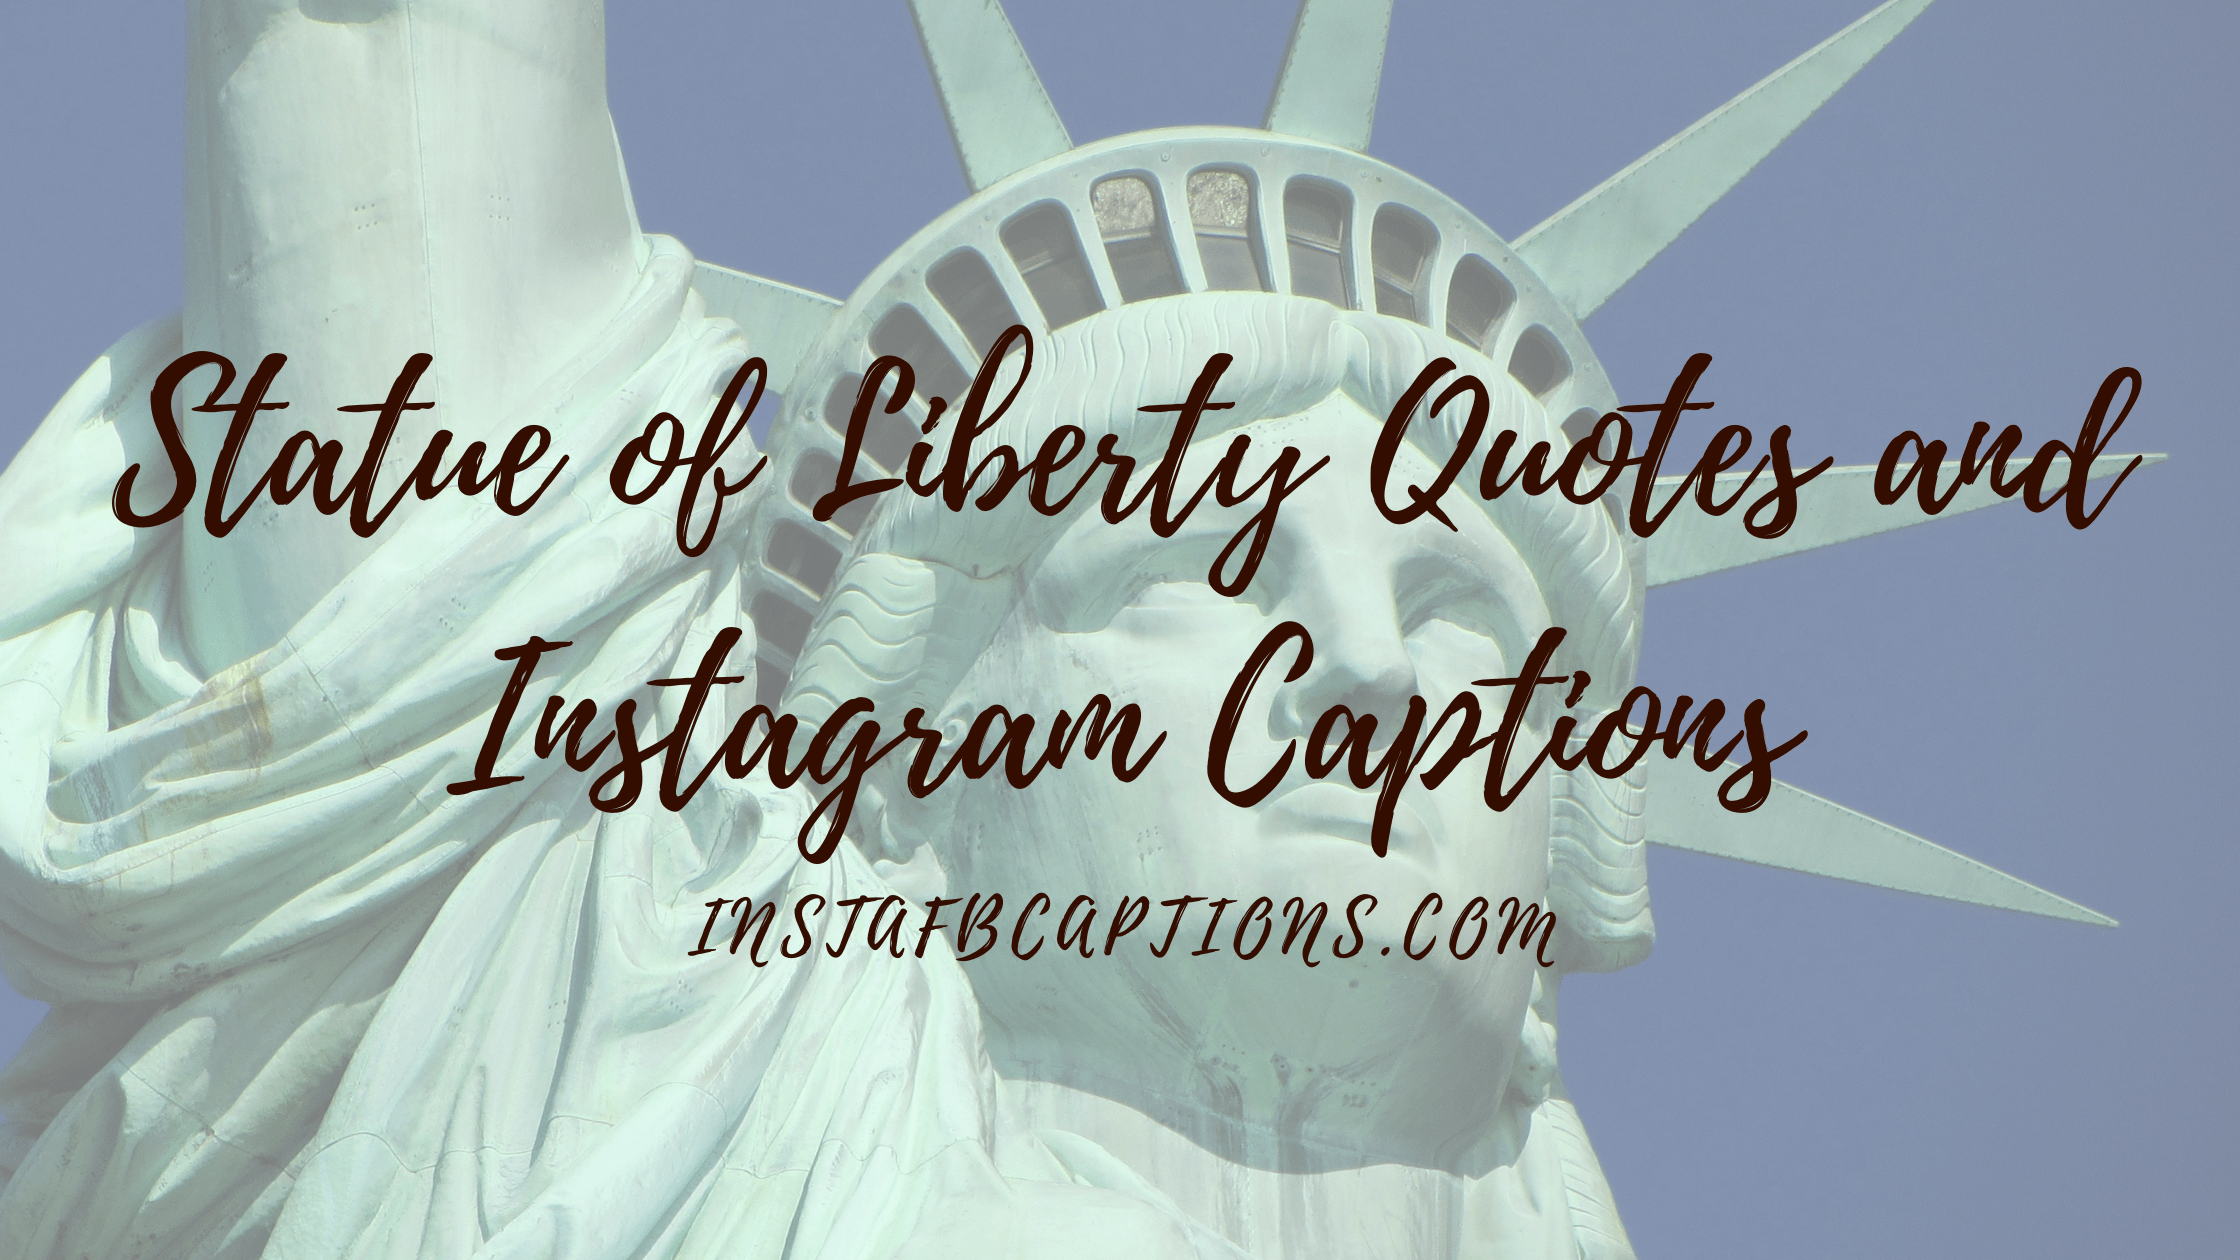 Statue Of Liberty Quotes And Instagram Captions  - Statue of Liberty Quotes and Instagram Captions - 78 Statue of Liberty Instagram Captions in 2022